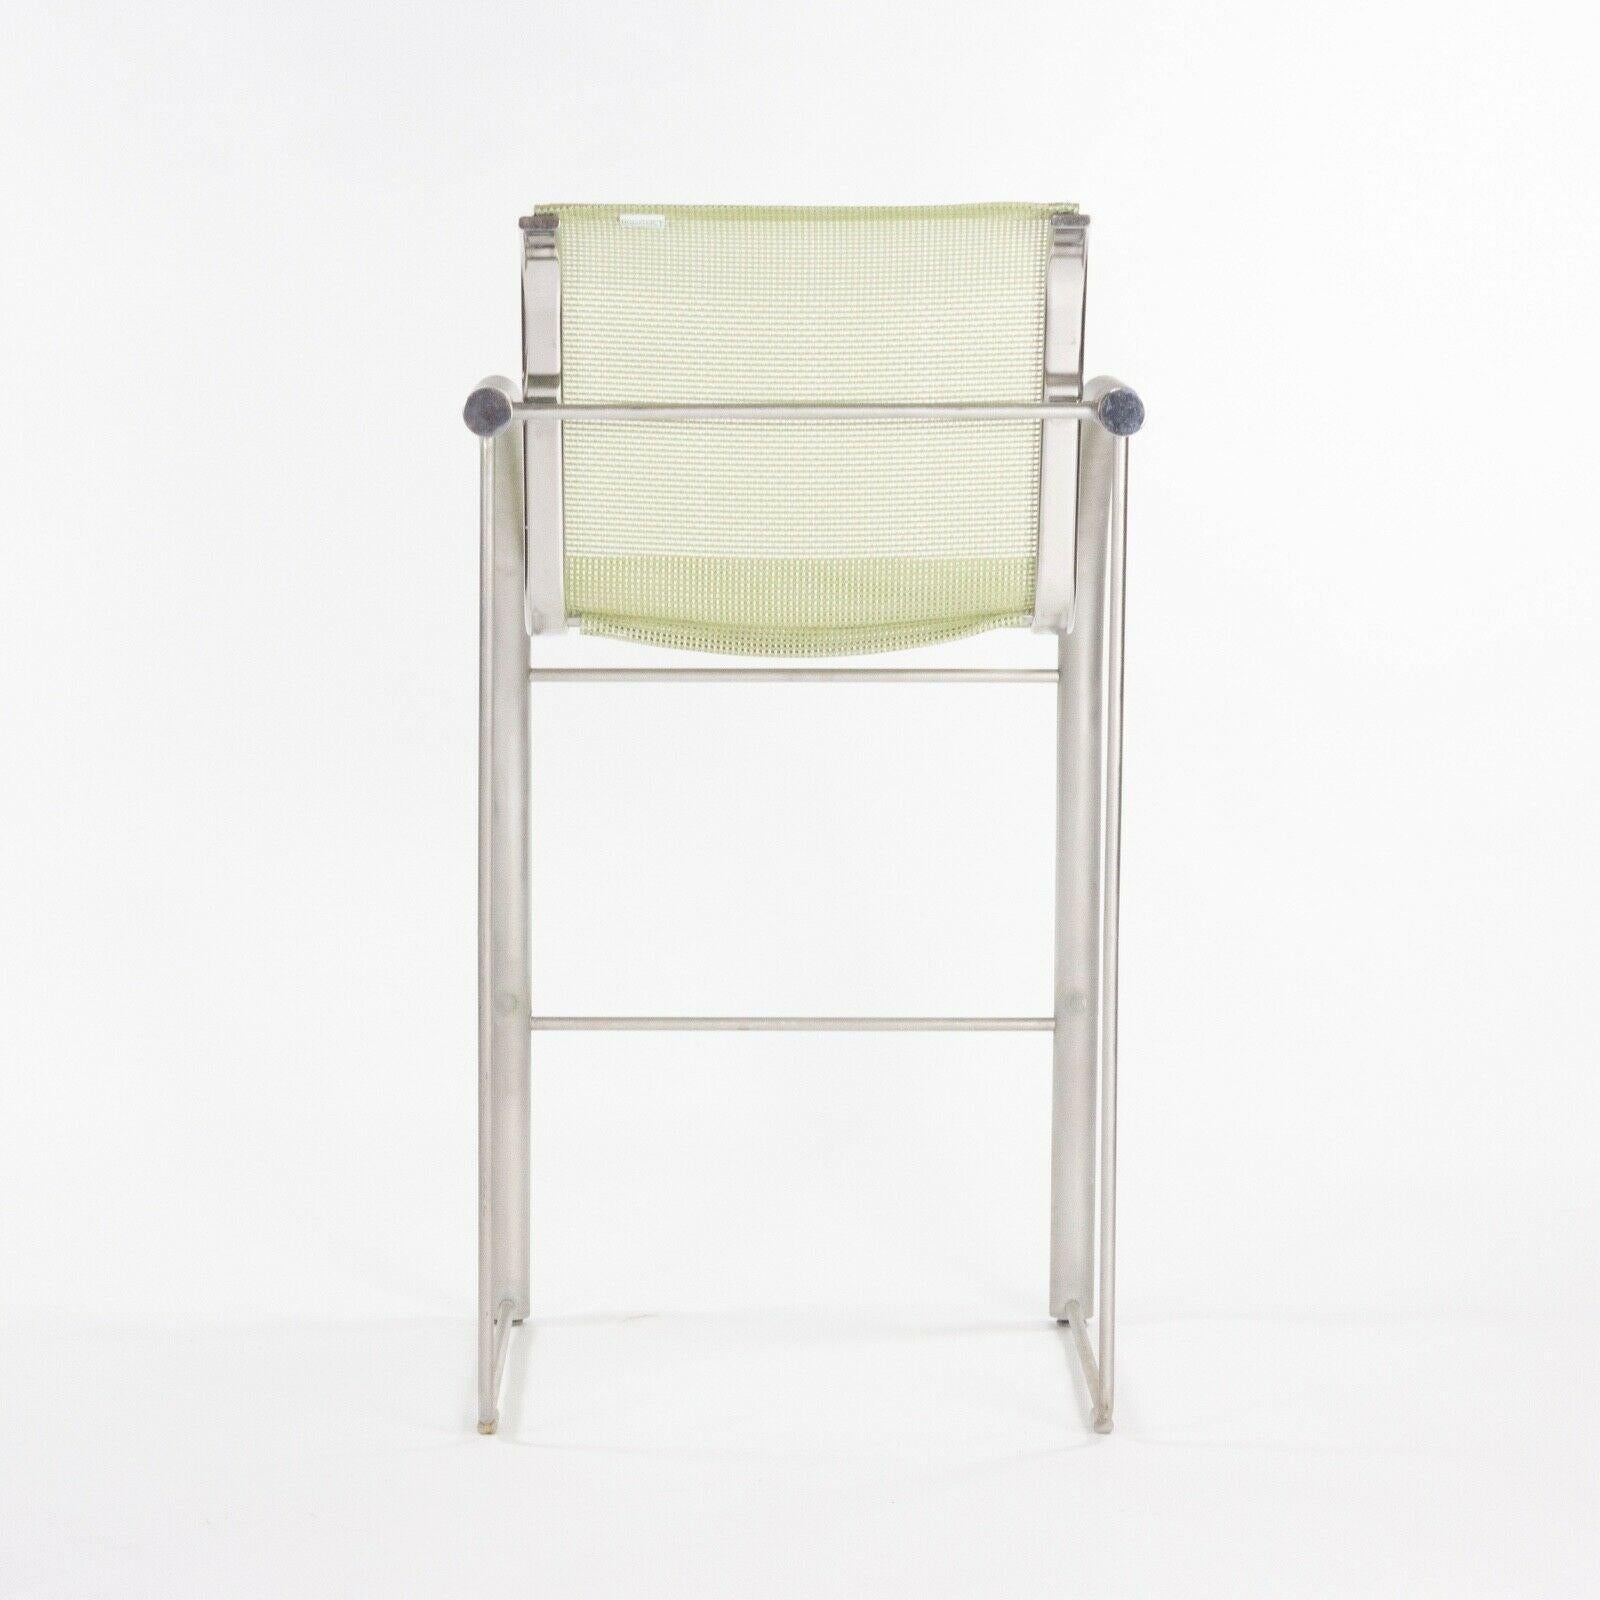 Contemporary Prototype Richard Schultz 2002 Collection Stainless Bar Stool with Outdoor Mesh